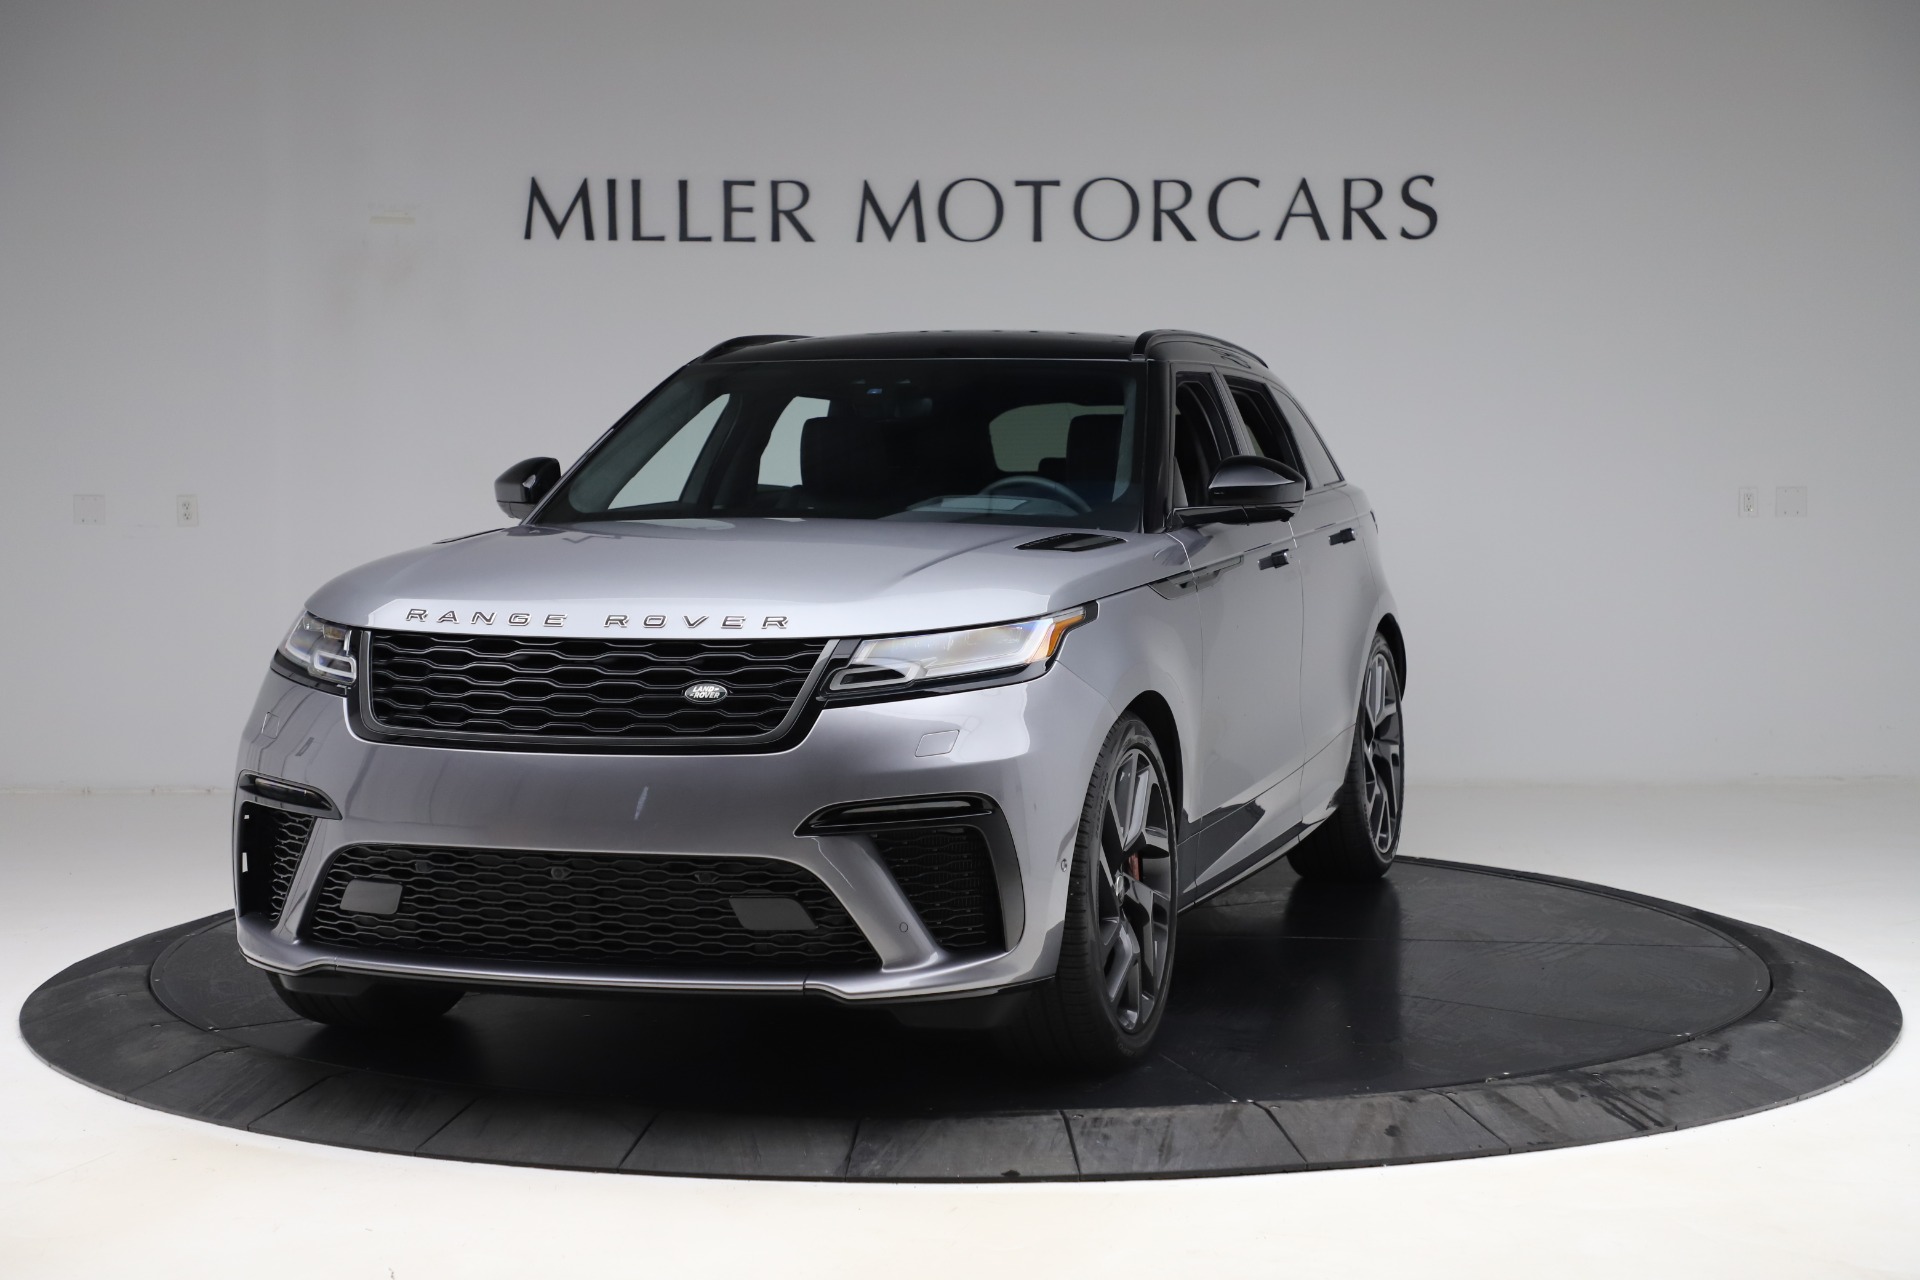 Used 2020 Land Rover Range Rover Velar SVAutobiography Dynamic Edition for sale Sold at McLaren Greenwich in Greenwich CT 06830 1